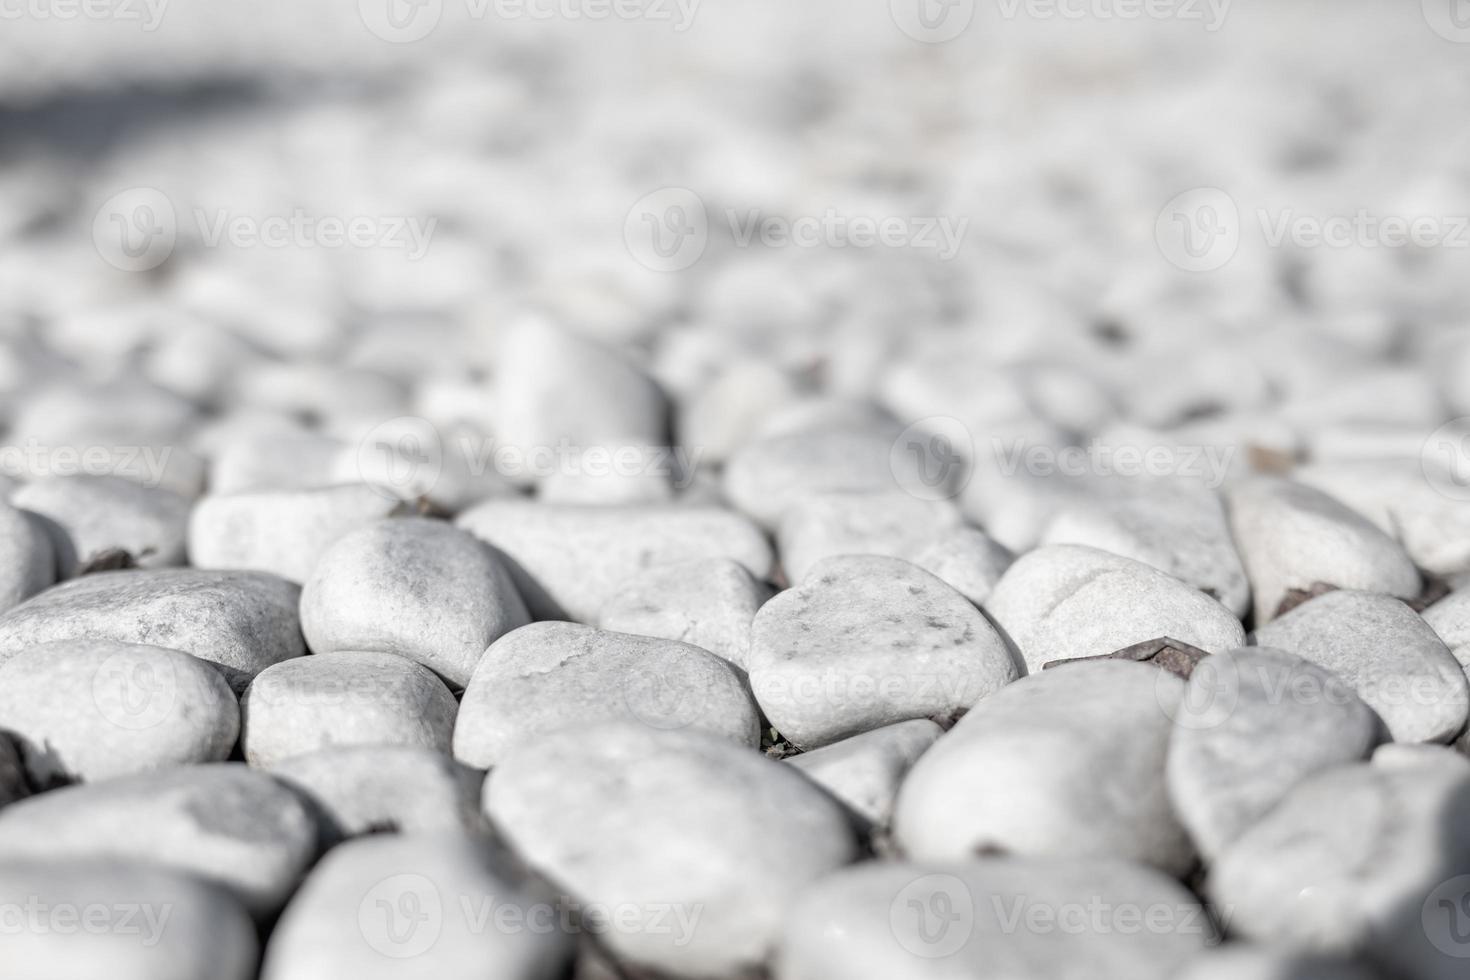 White stone background, stones - abstract background with round pebbles photo